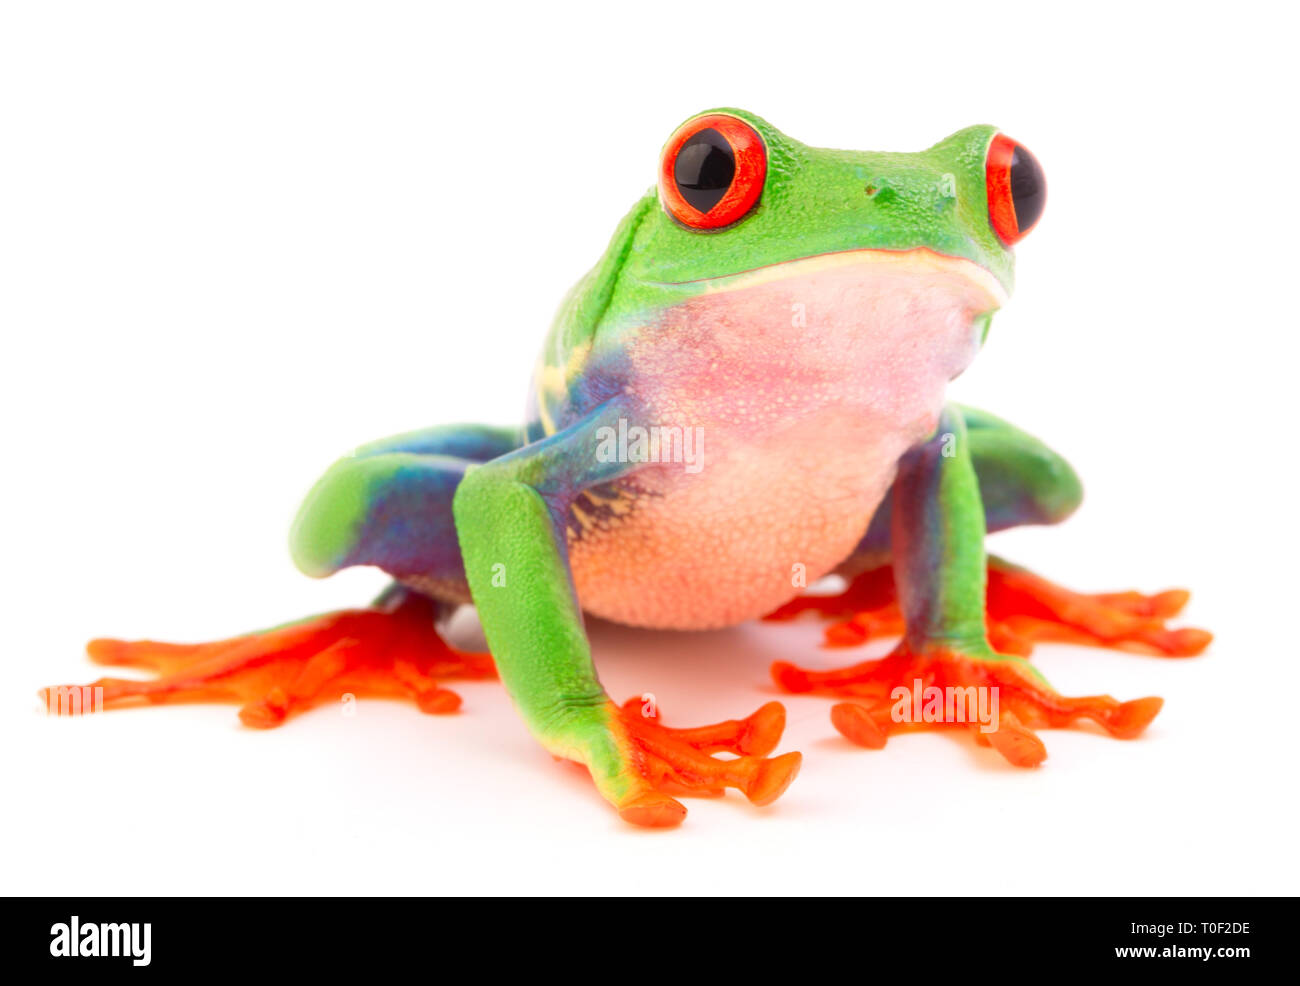 Red eyed monkey tree frog, Agalychnis callydrias. A tropical rain forest animal with vibrant eye isolated on a white background. Stock Photo